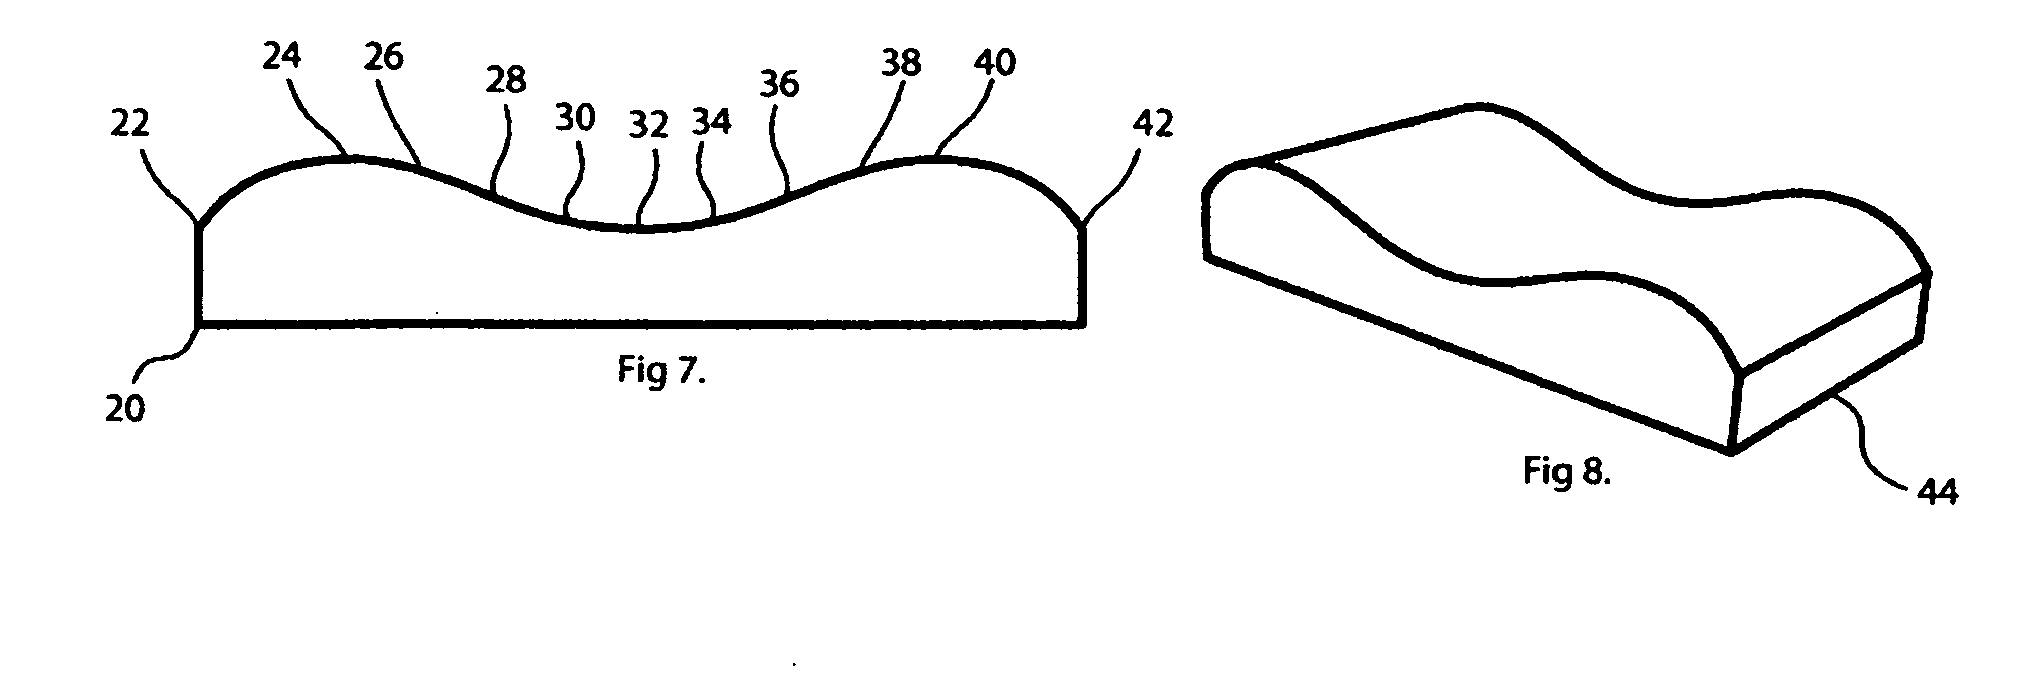 Body support system for a variety of purposes